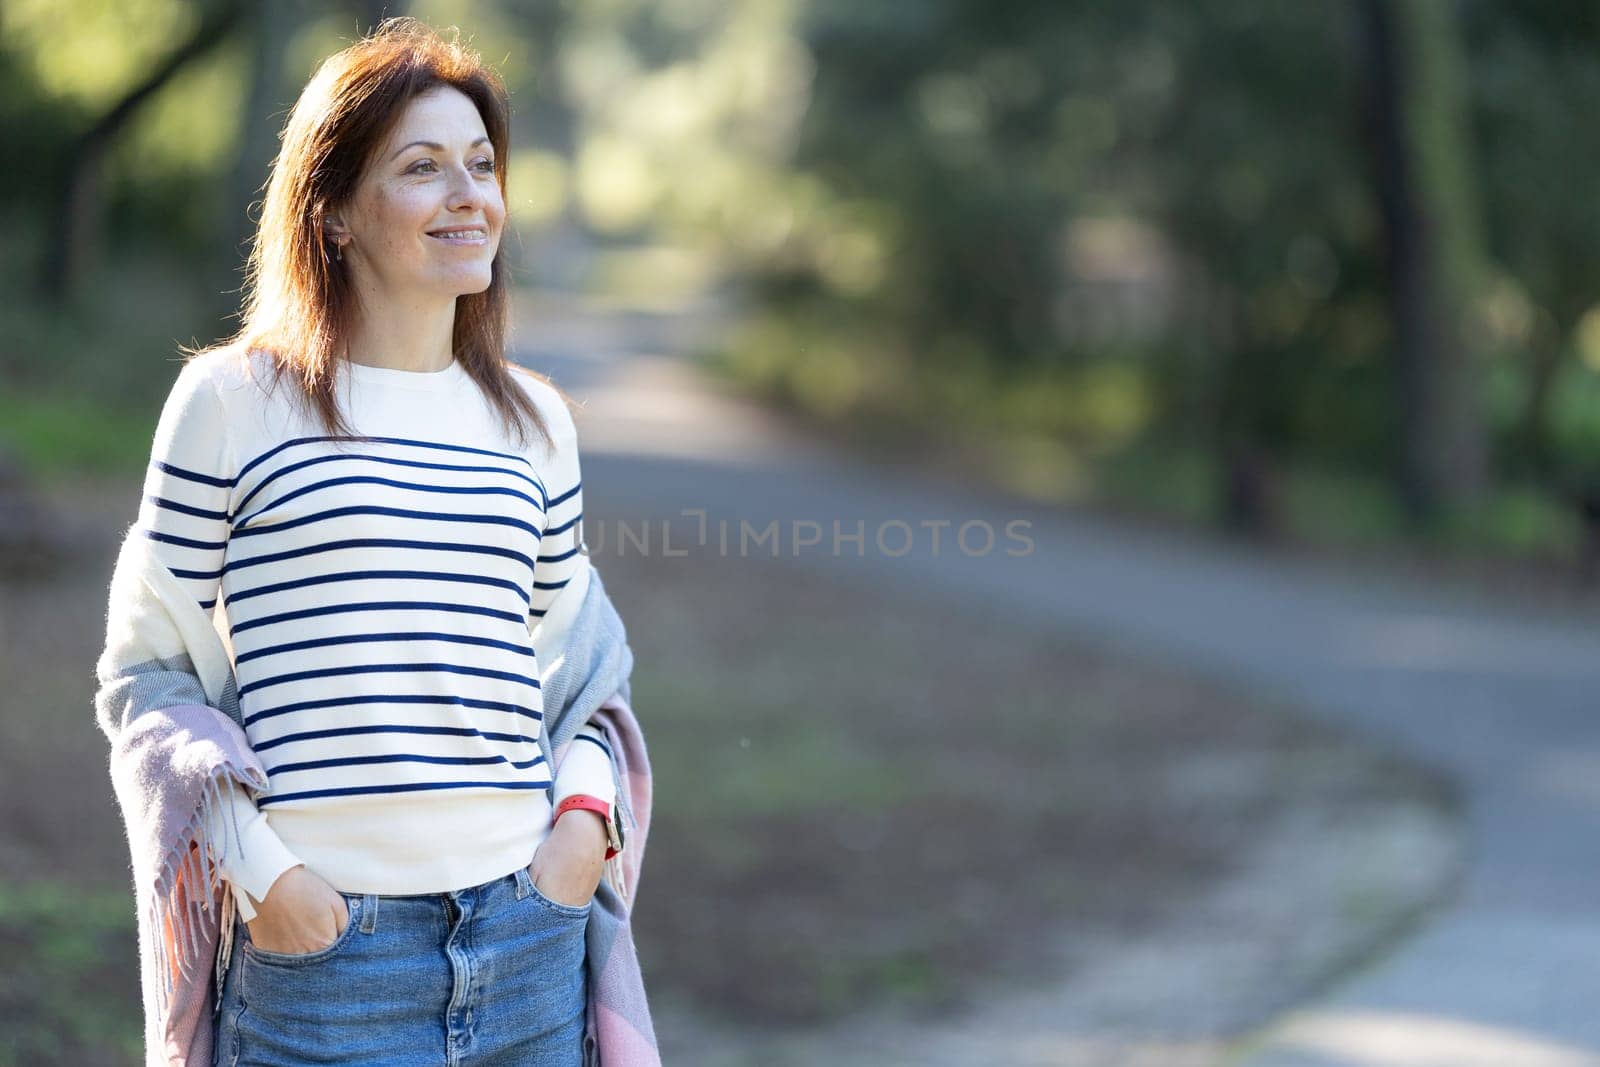 An adult woman with dentistry braces wearing a striped sweater and jeans is standing on a path. She is smiling and looking to her right